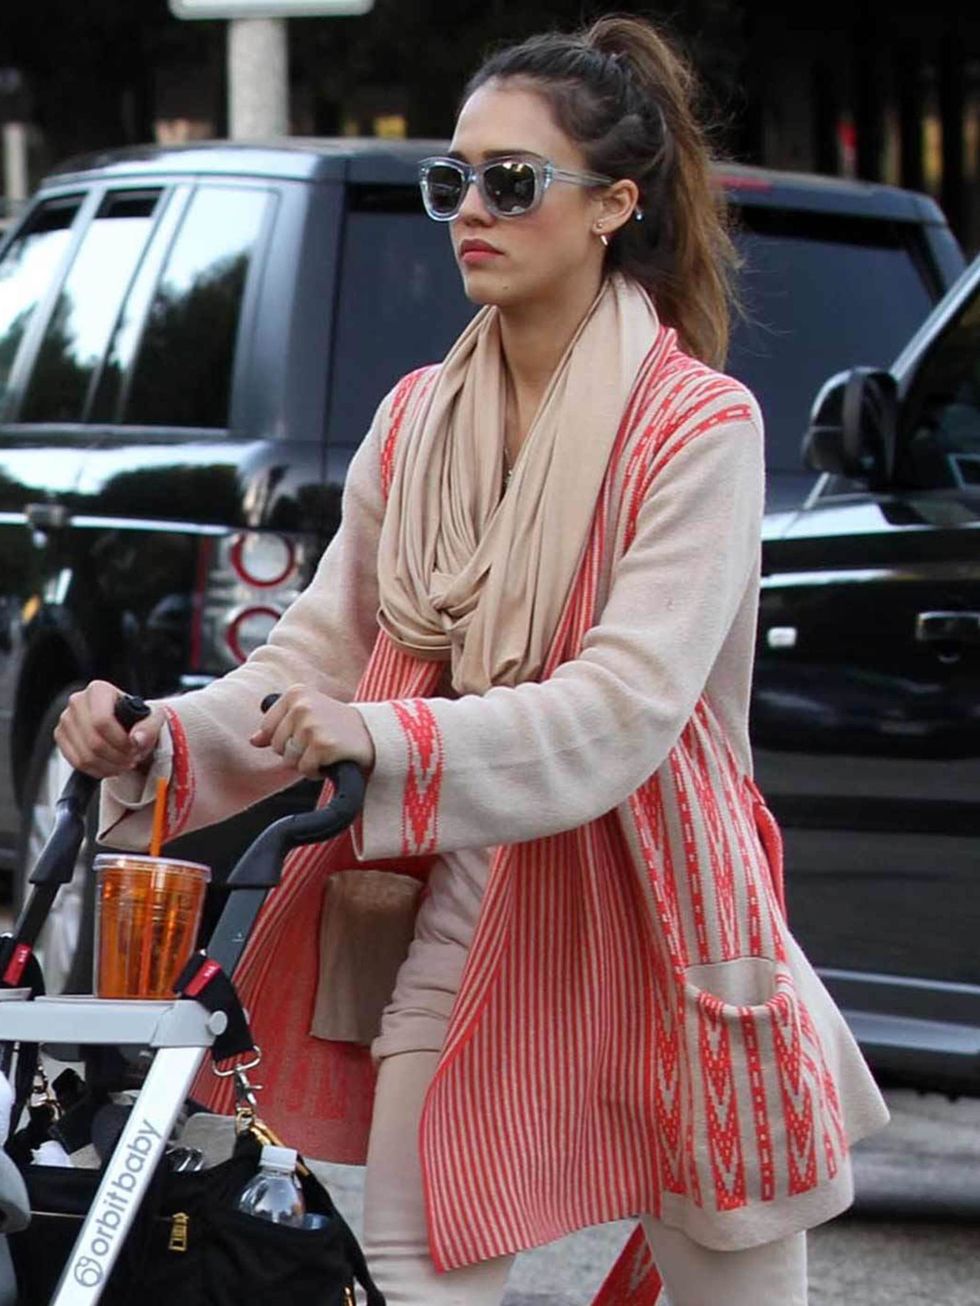 <p><a href="http://www.elleuk.com/star-style/celebrity-style-files/jessica-alba">Jessica Alba</a> adding edge to her daytime looks with a pair of <a href="http://www.elleuk.com/fashion/what-to-wear/colourful-plastics">perspex sunglasses</a></p>